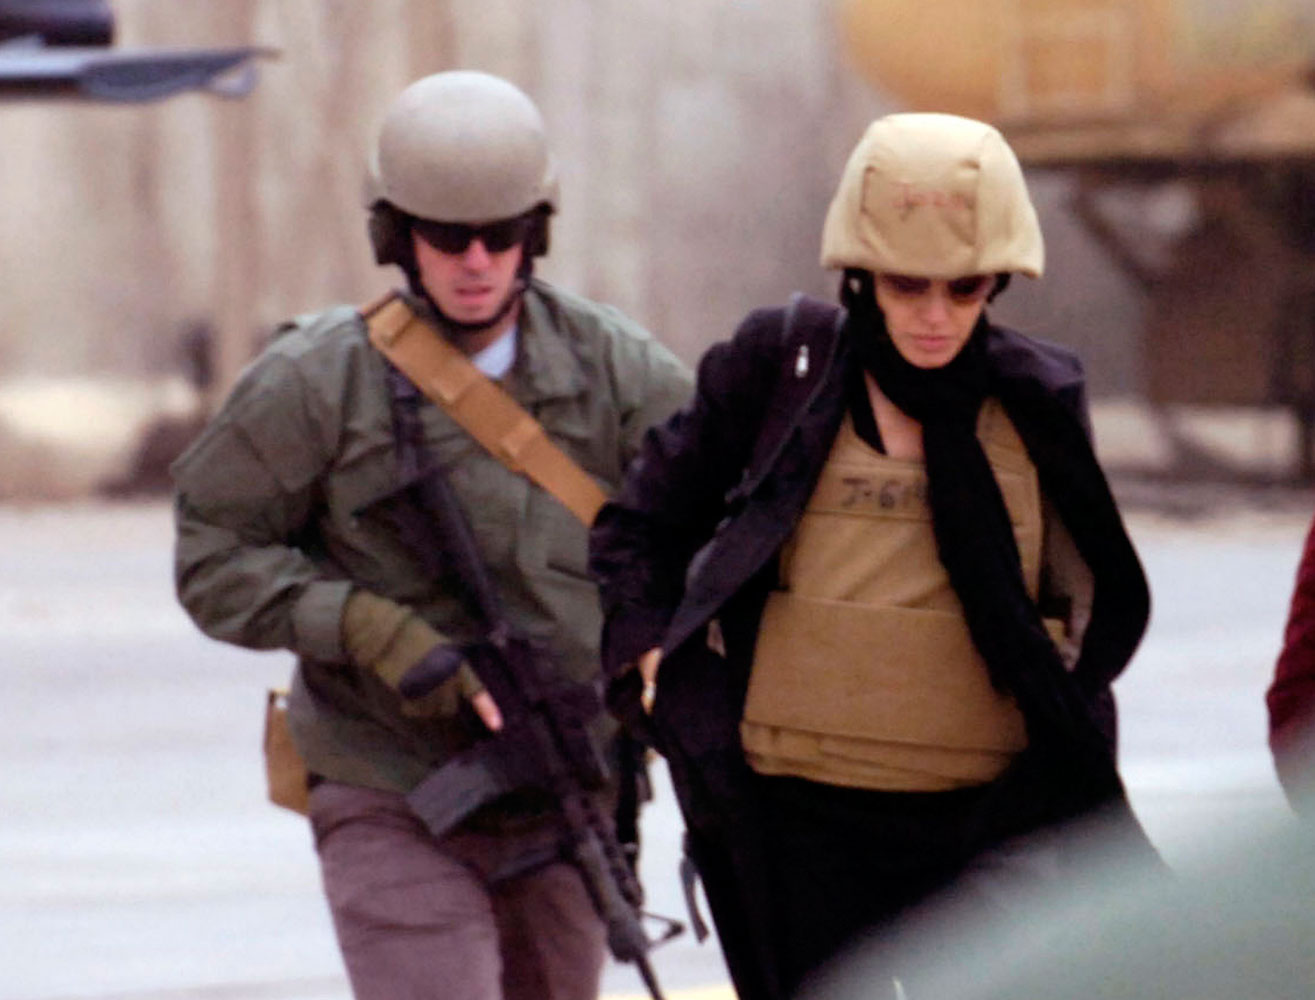 Actress Angelina Jolie visits the Green Zone in Baghdad Feb. 7, 2008.